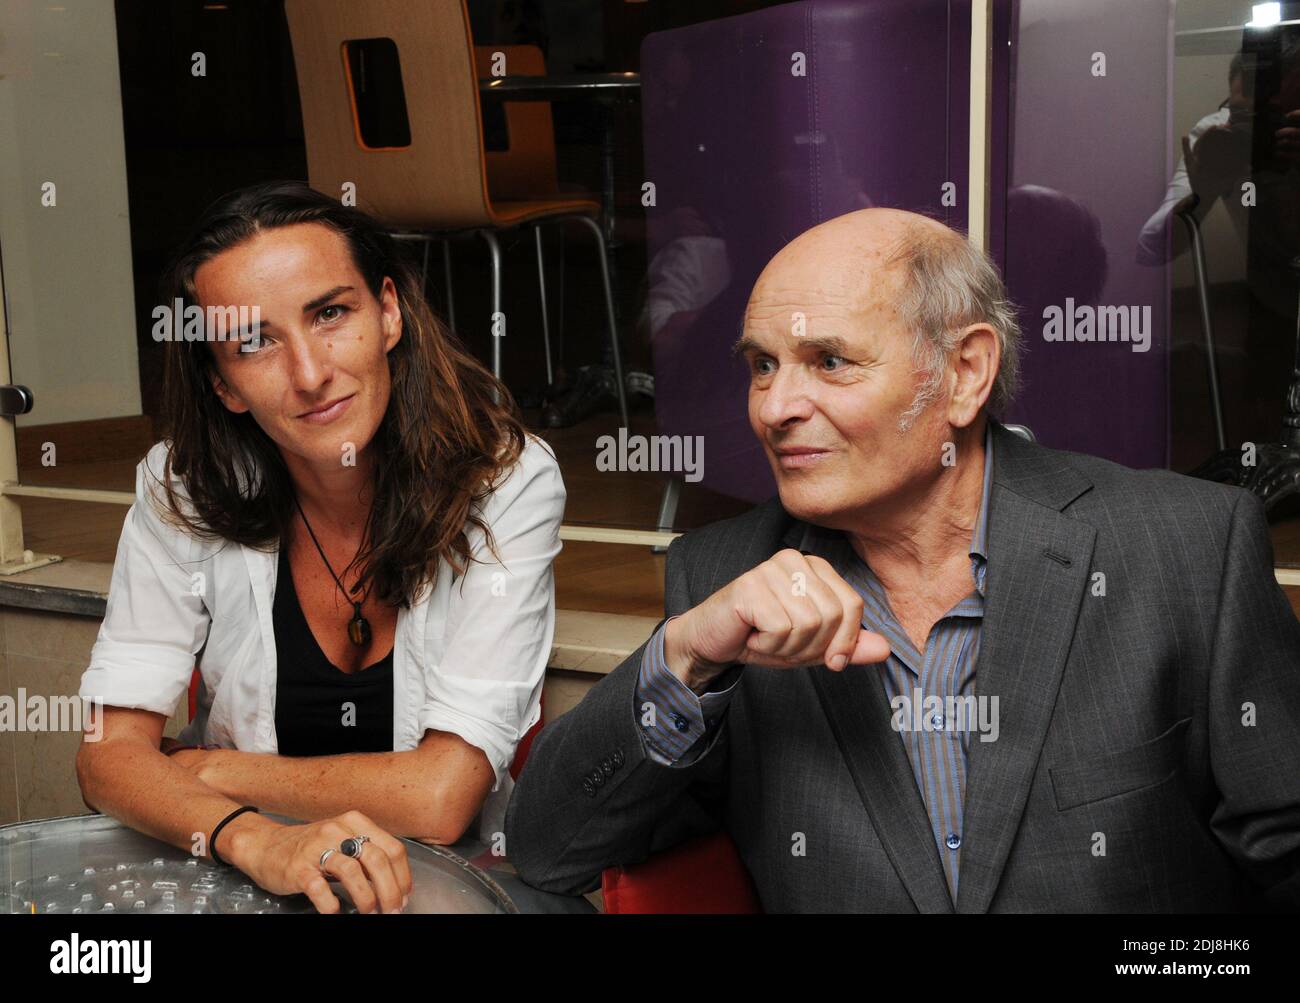 Jean-Francois Stevenin and Salome attending the Jeunesse premiere directed  by Julien Samani in Paris, France on September 6, 2016. Photo by Alain  Apaydin/ABACAPRESS.COM Stock Photo - Alamy